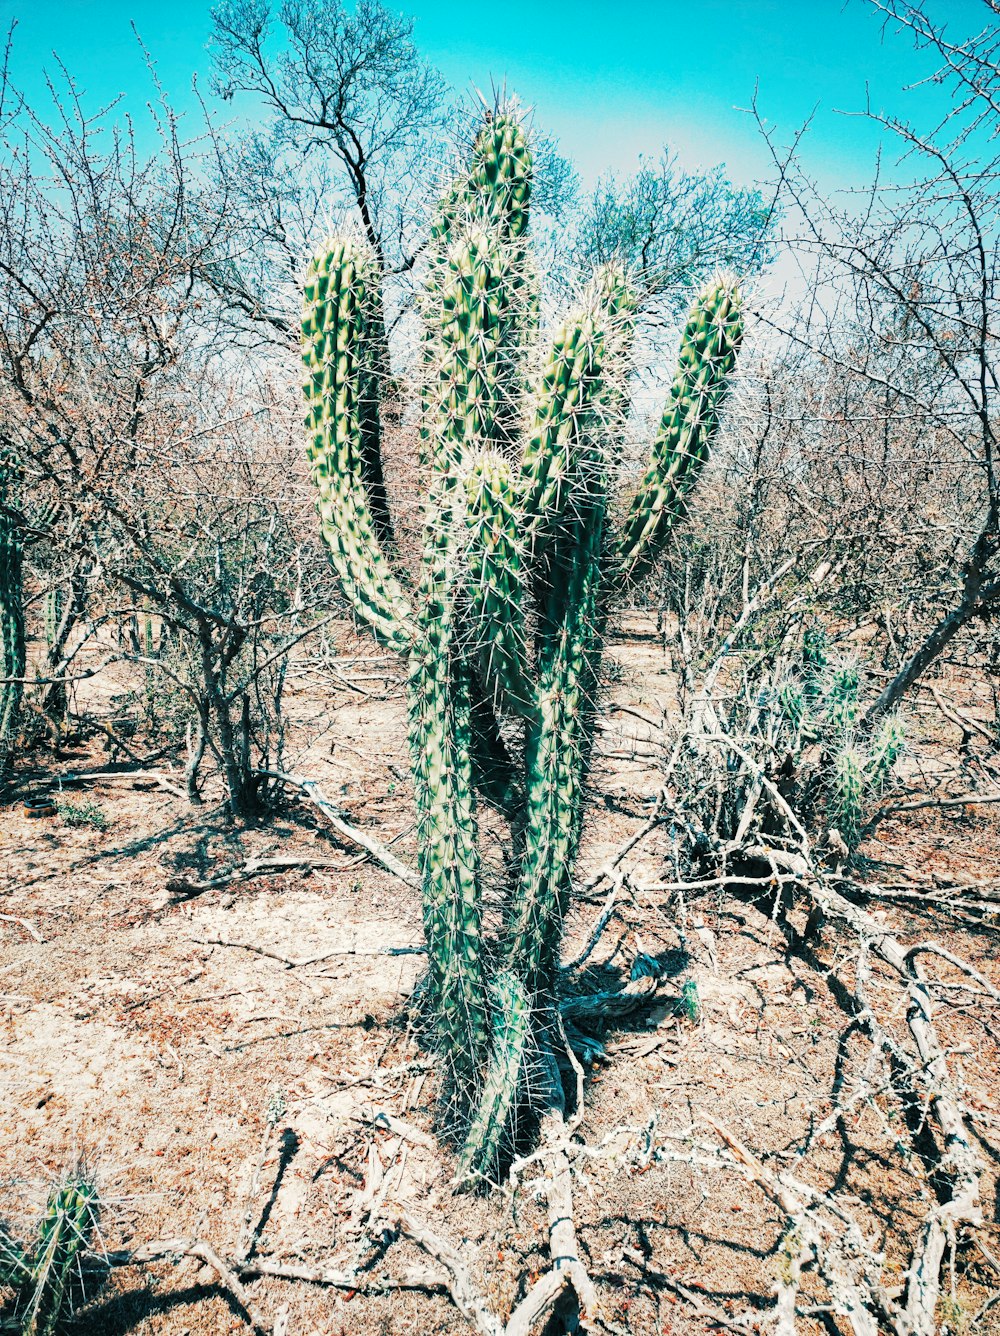 a cactus in the middle of a desert